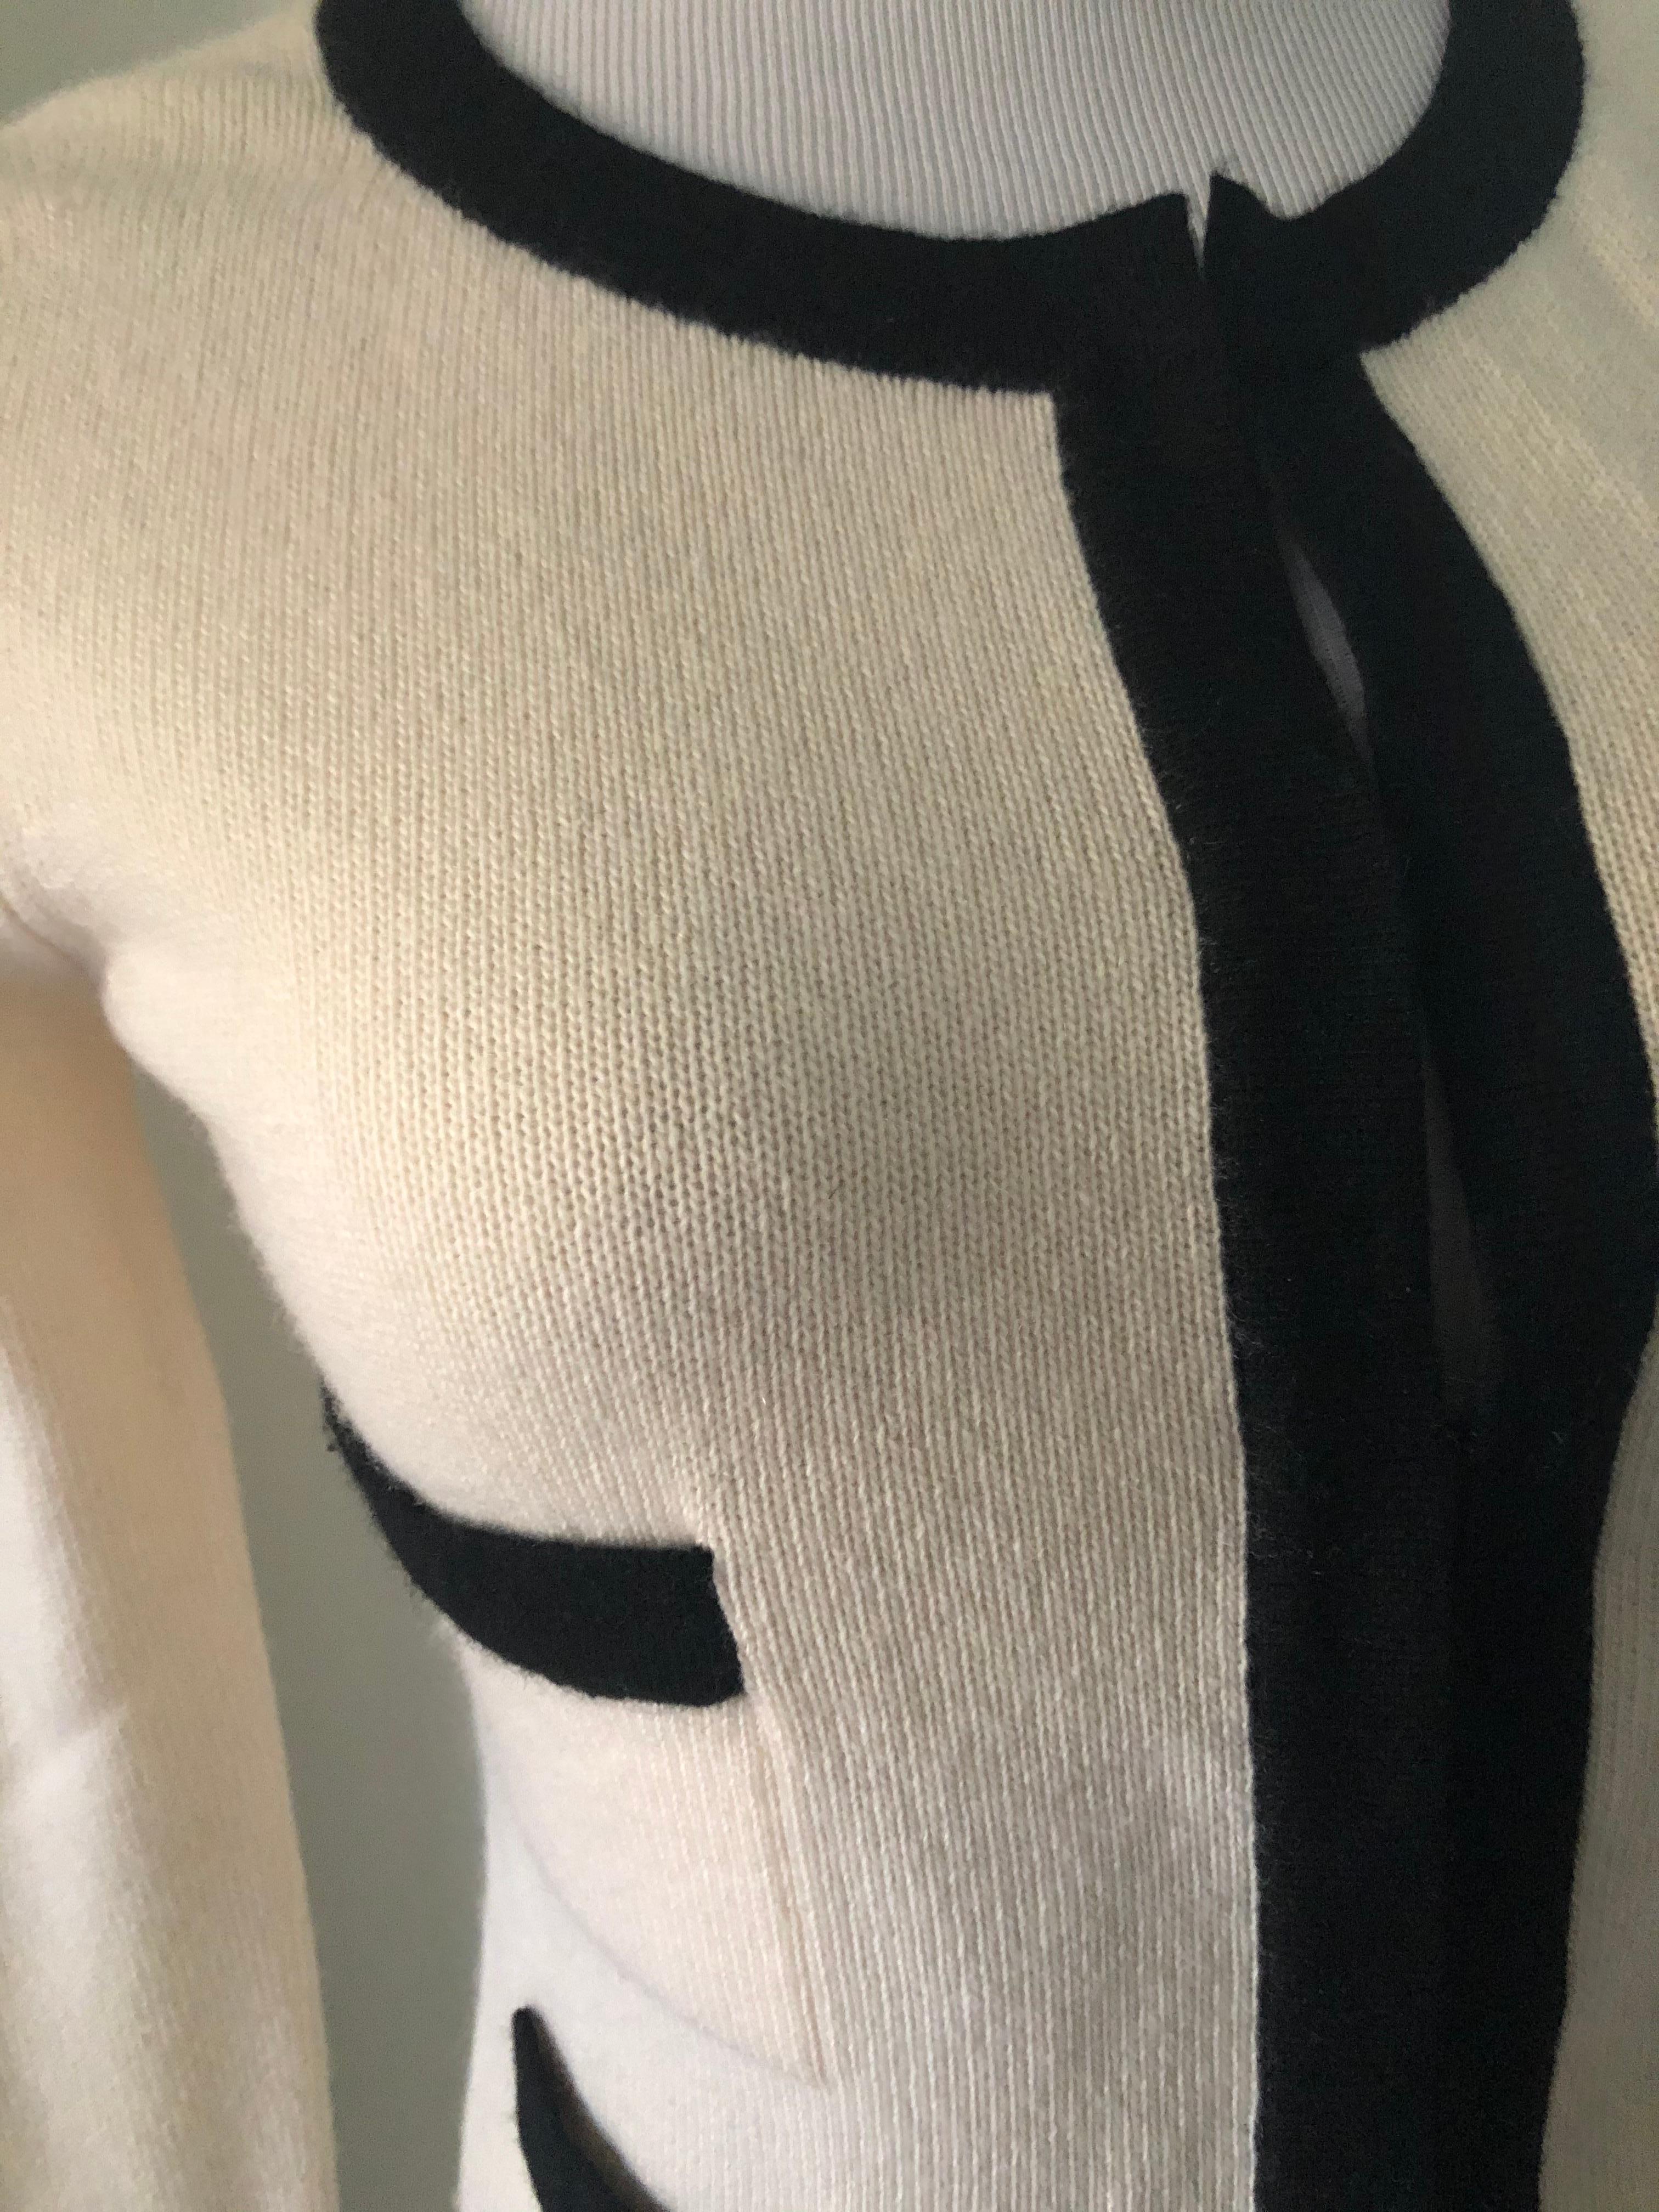 White Chanel Cream and Black Cashmere Cardigan Size 36 Fr.